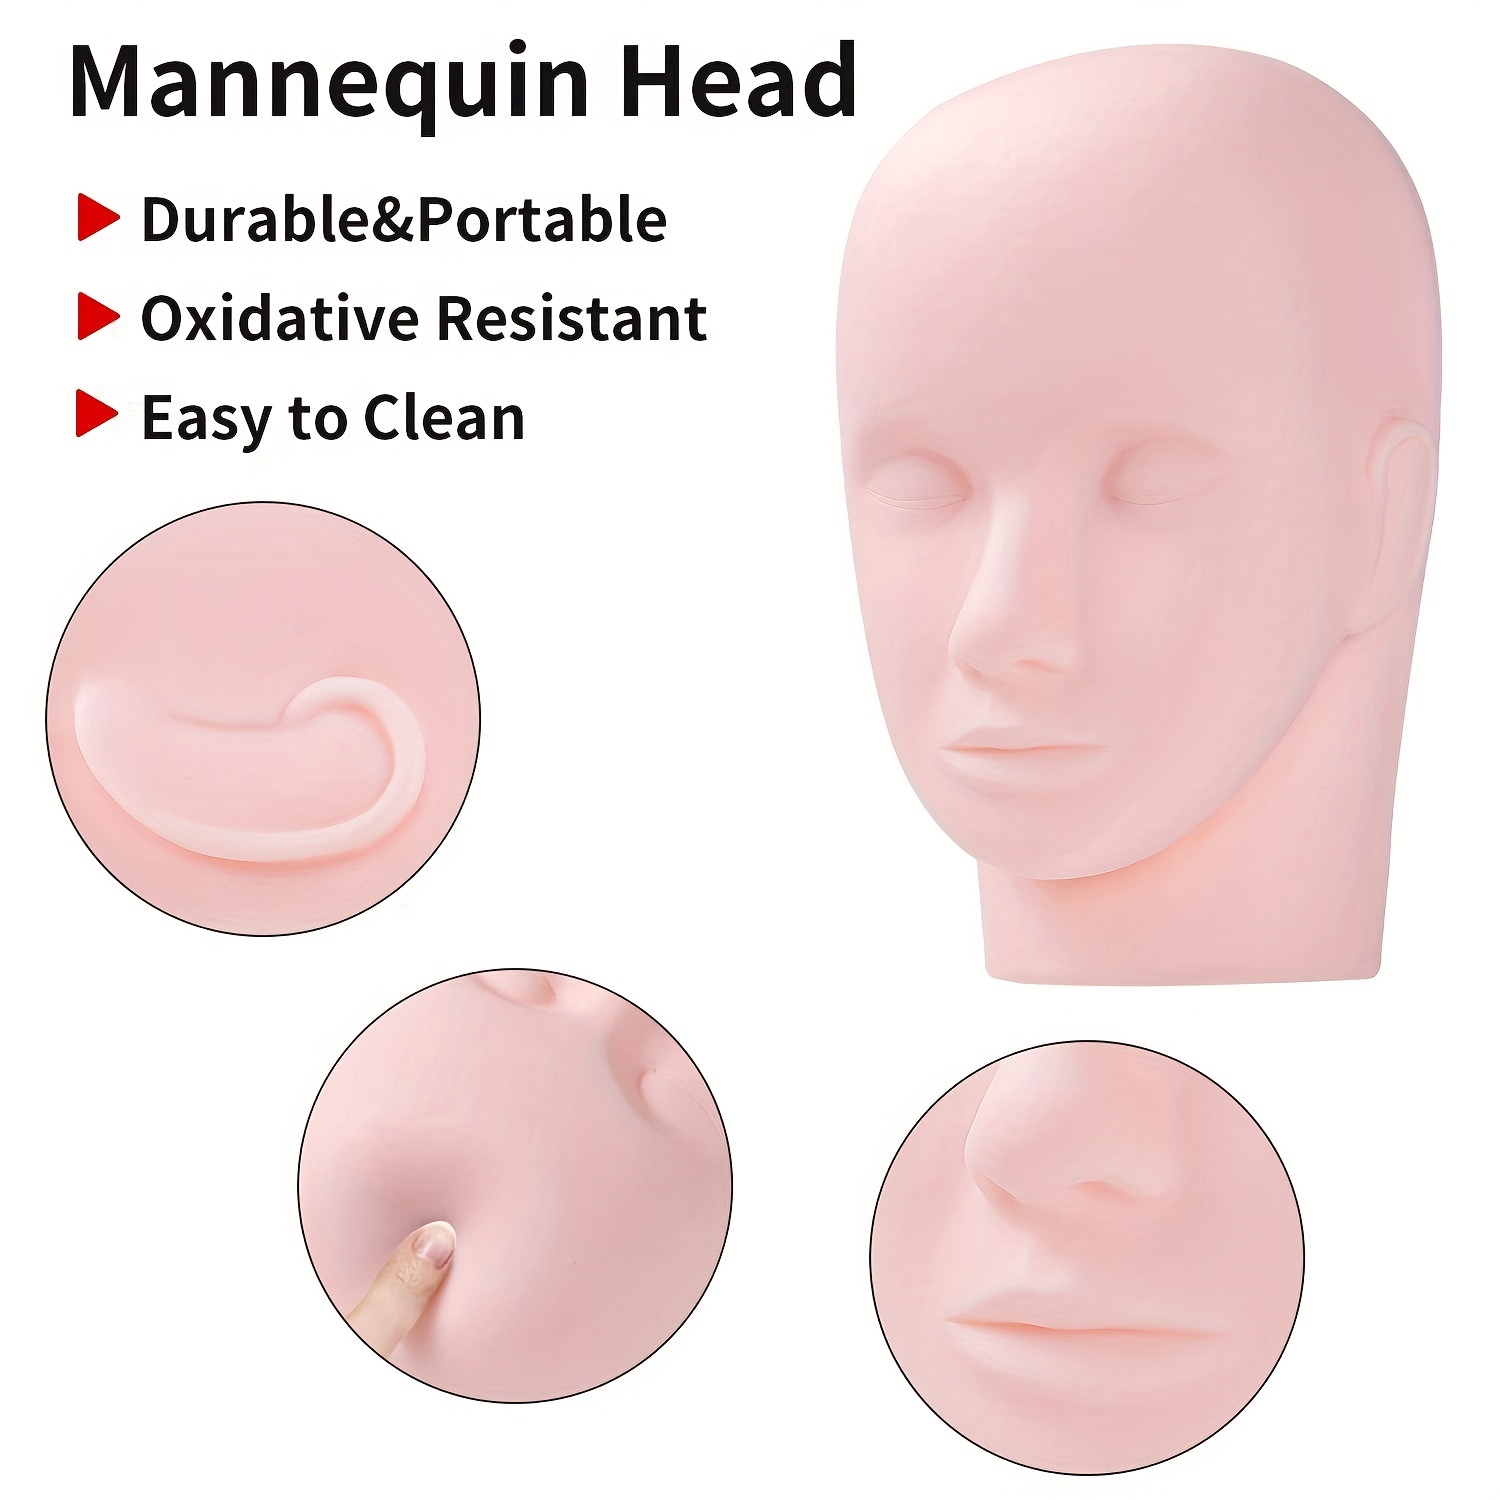 Makeup Mannequin Head for Practice Cosmetology Massage Training